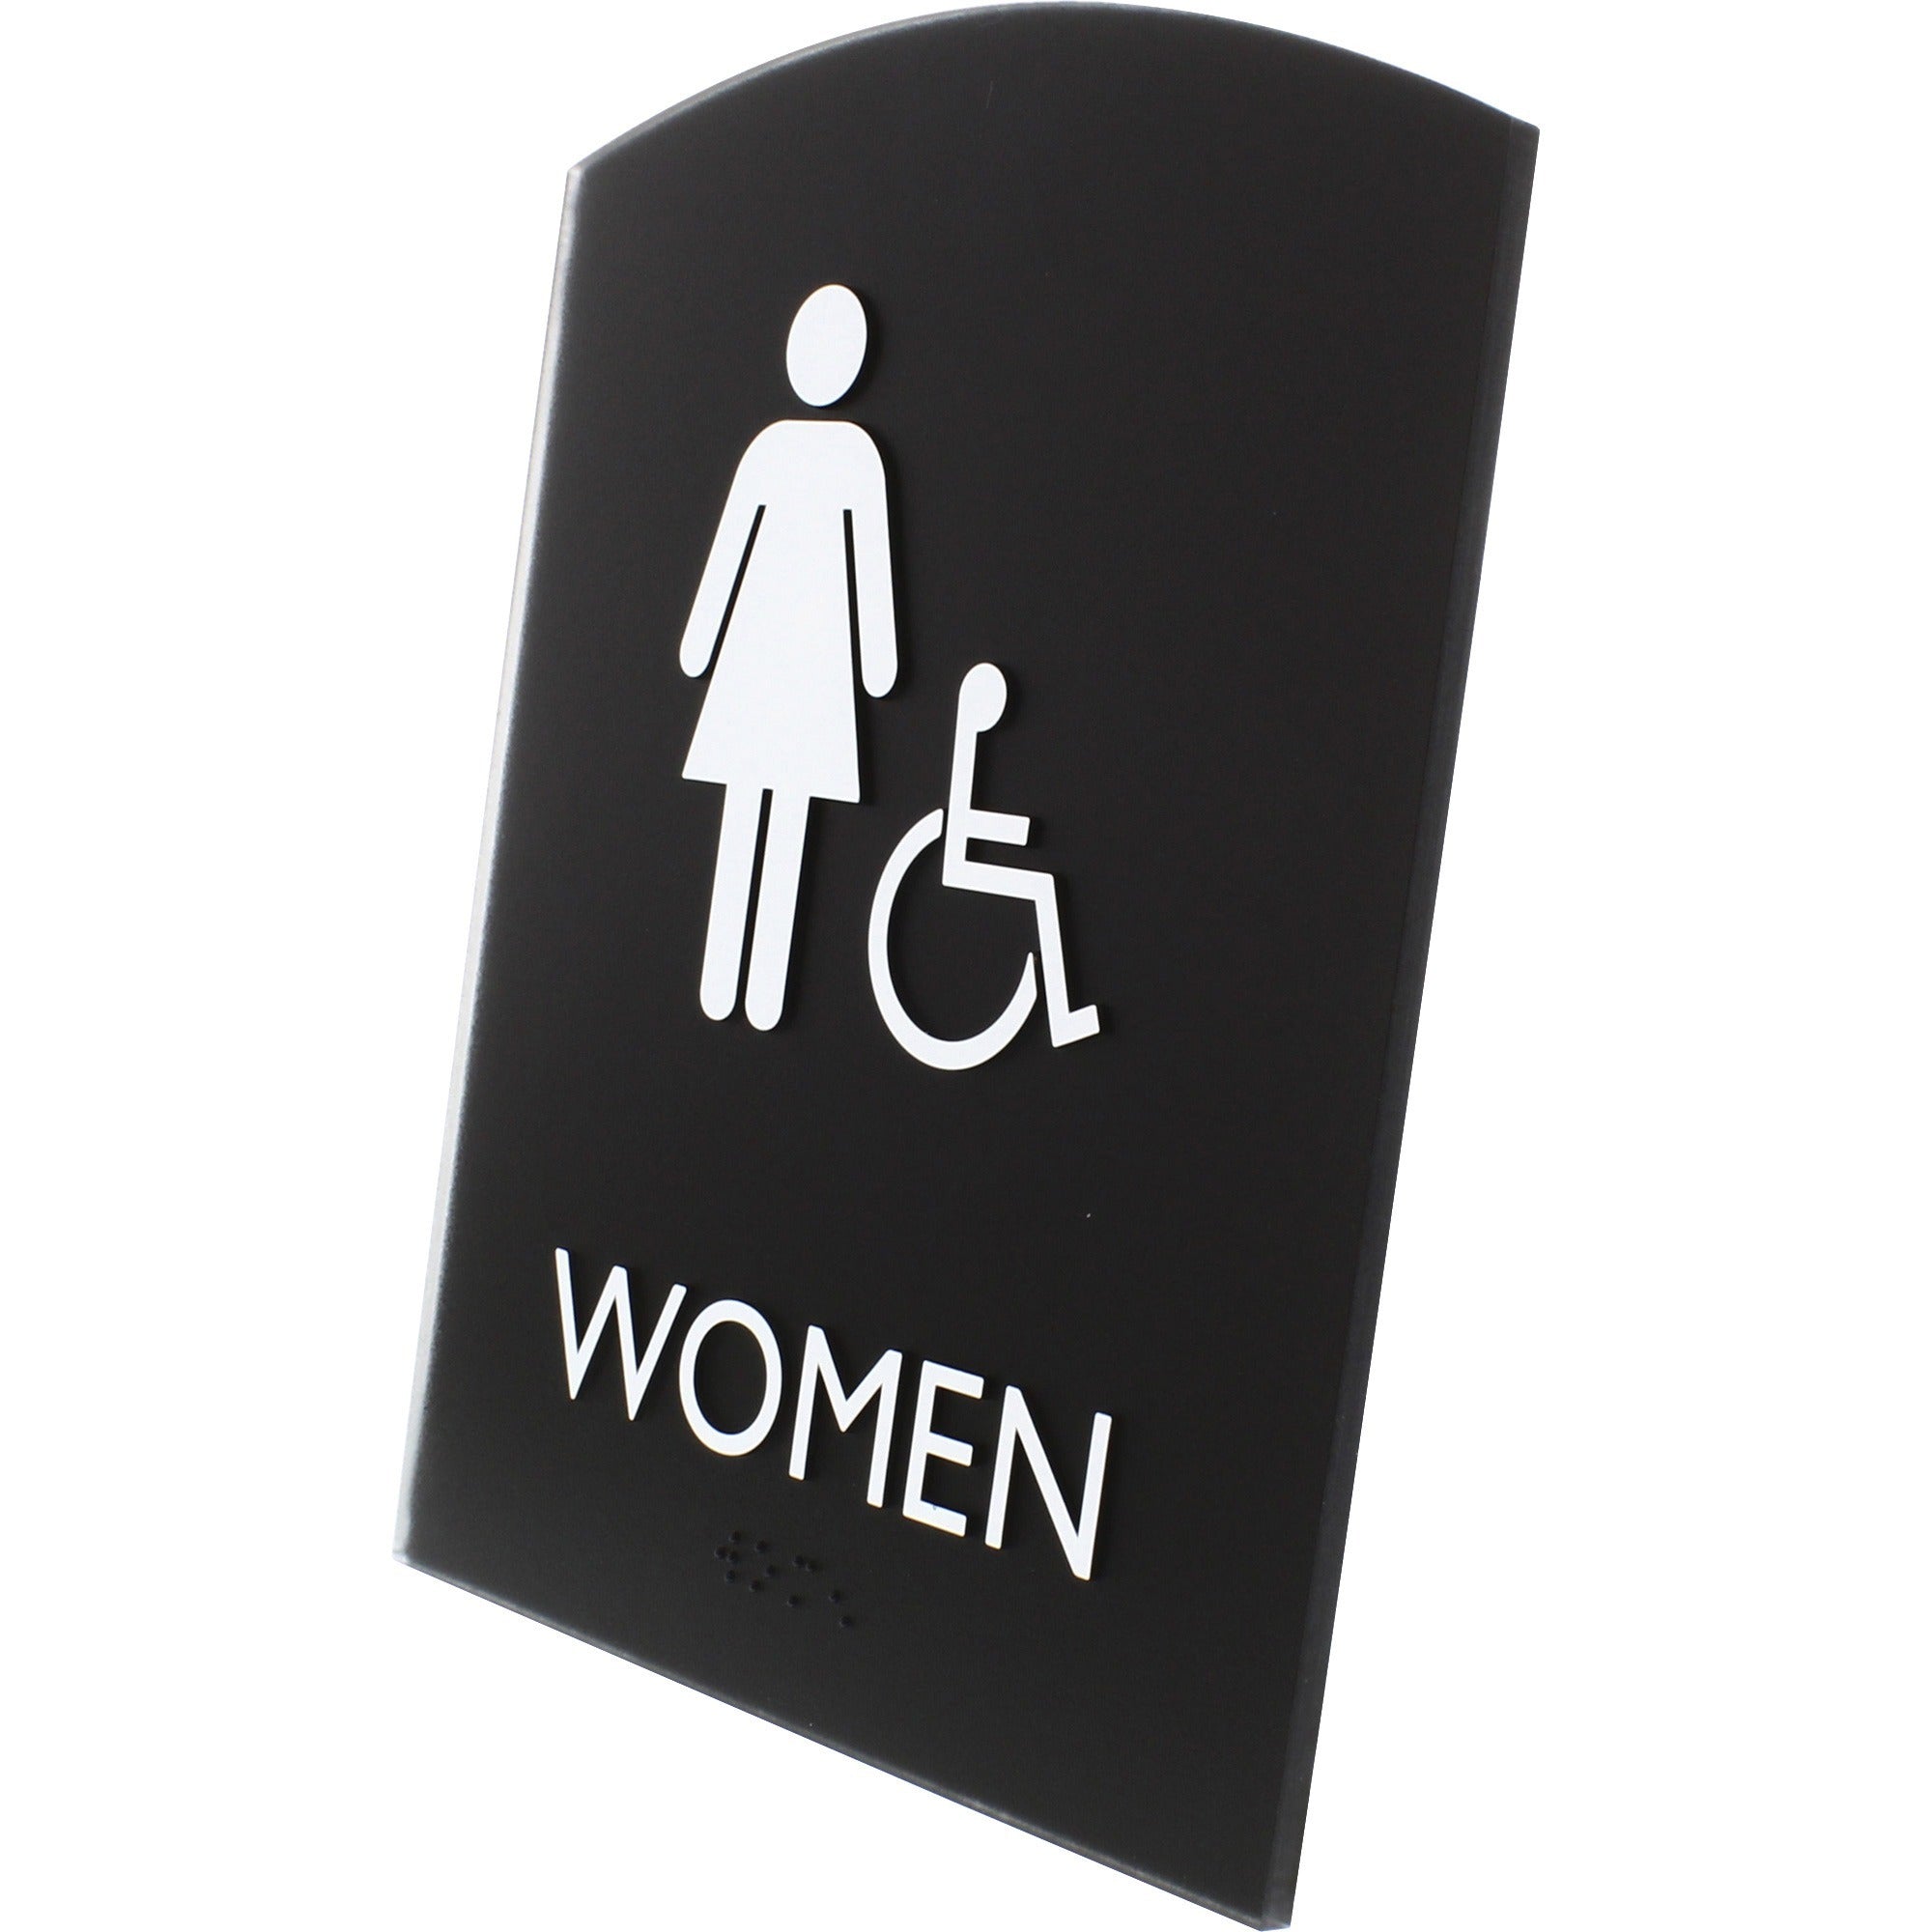 lorell-arched-womens-handicap-restroom-sign-1-each-women-print-message-68-width-x-85-height-rectangular-shape-surface-mountable-easy-readability-braille-plastic-black_llr02675 - 2